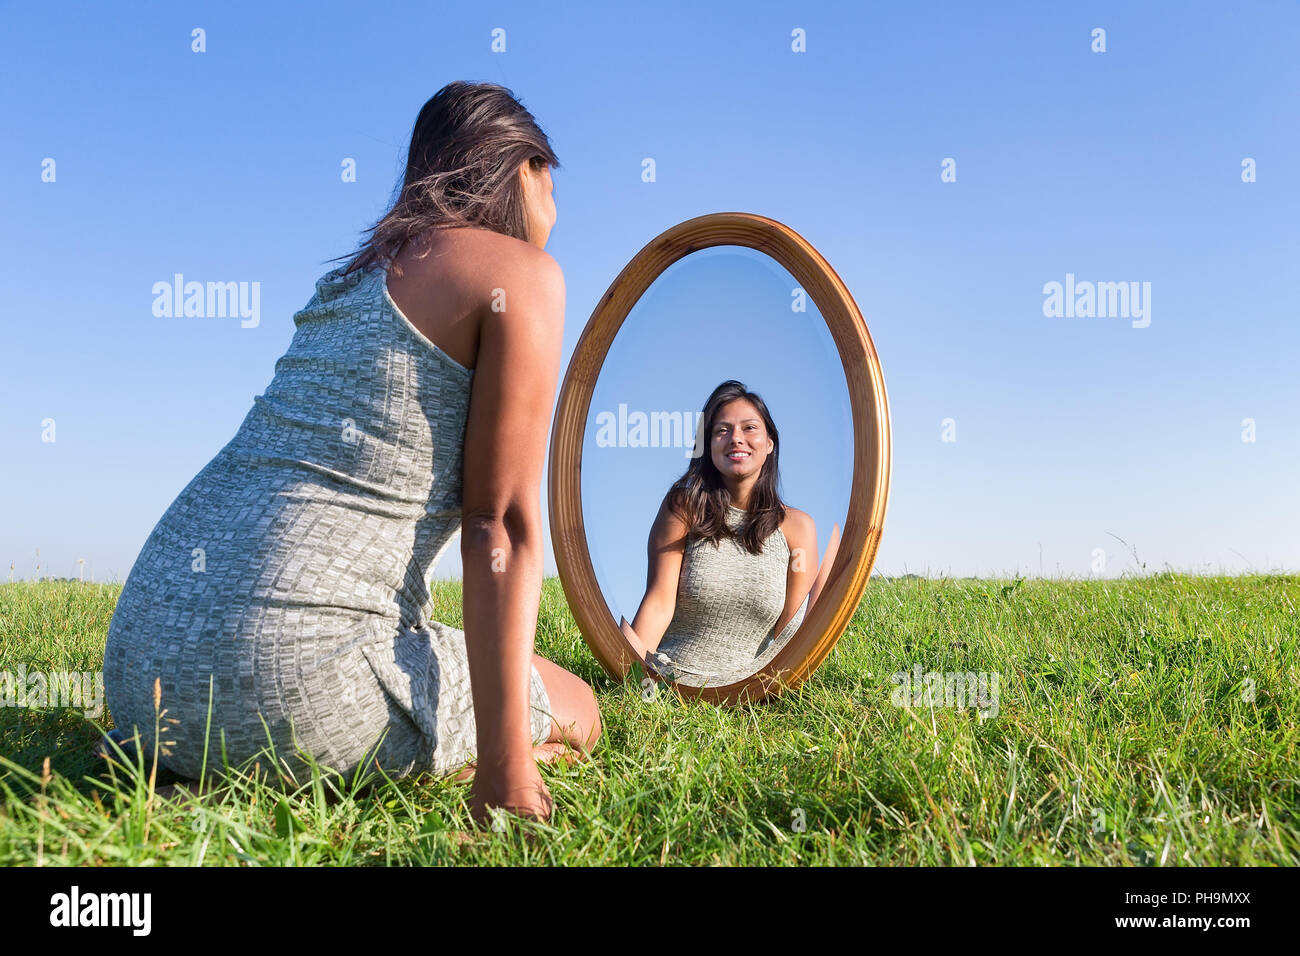 Woman kneeling on grass looking at mirror image Stock Photo